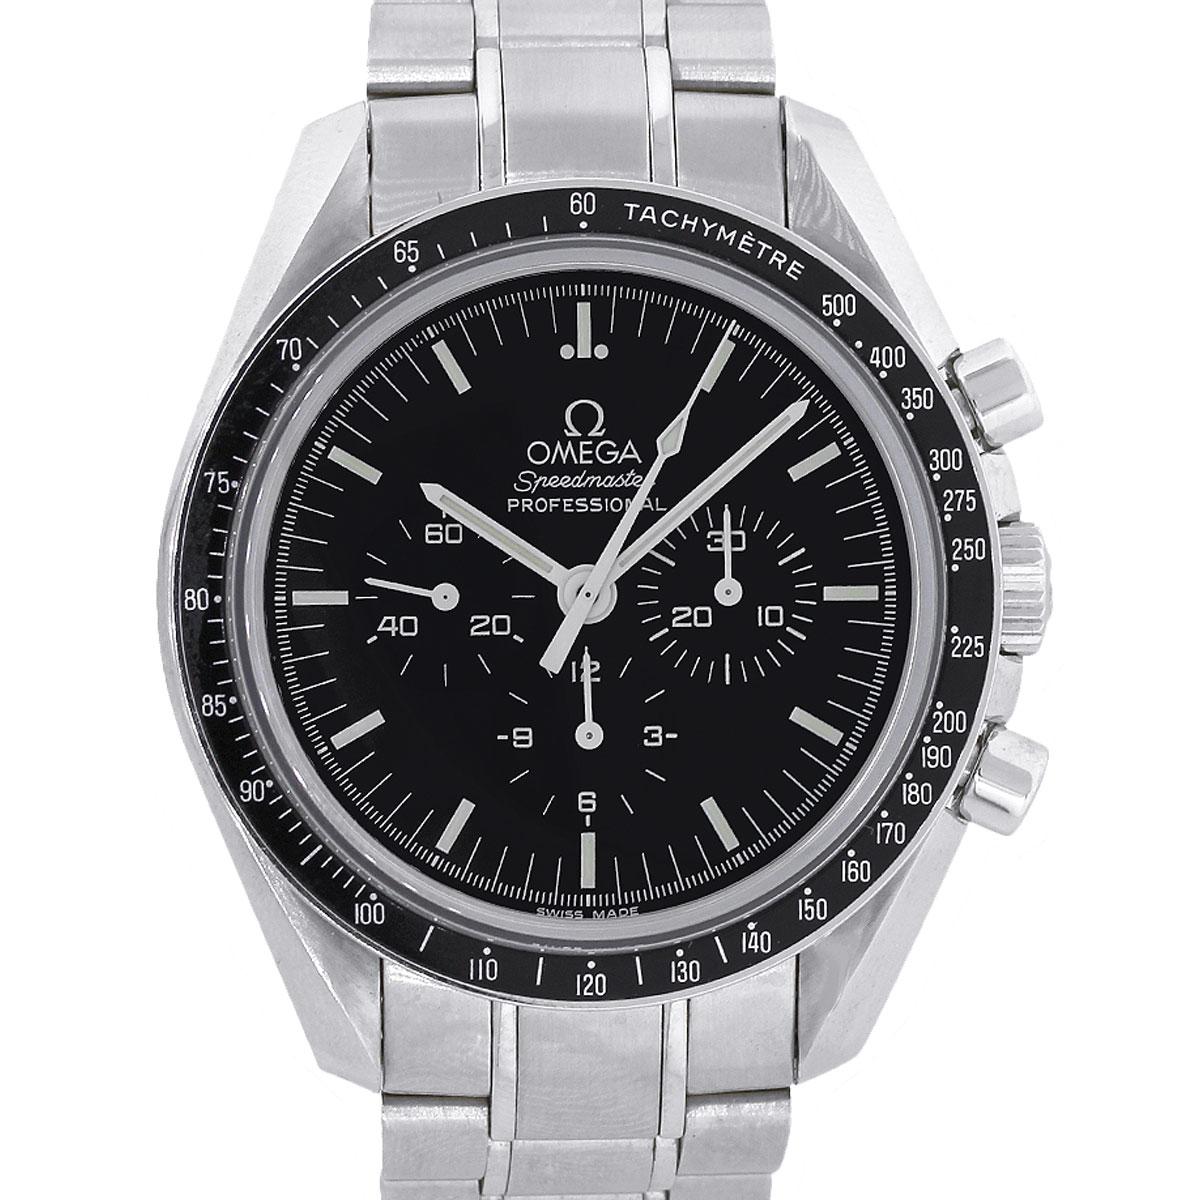 Brand: Omega
MPN: 3573.50.00
Model: Speedmaster
Case Material: Stainless Steel
Case Diameter: 42mm
Bezel: Black stainless Steel Tachymetre bezel
Dial: Black Chronographic dial with luminescent silver hands and markers.
Bracelet: Stainless steel